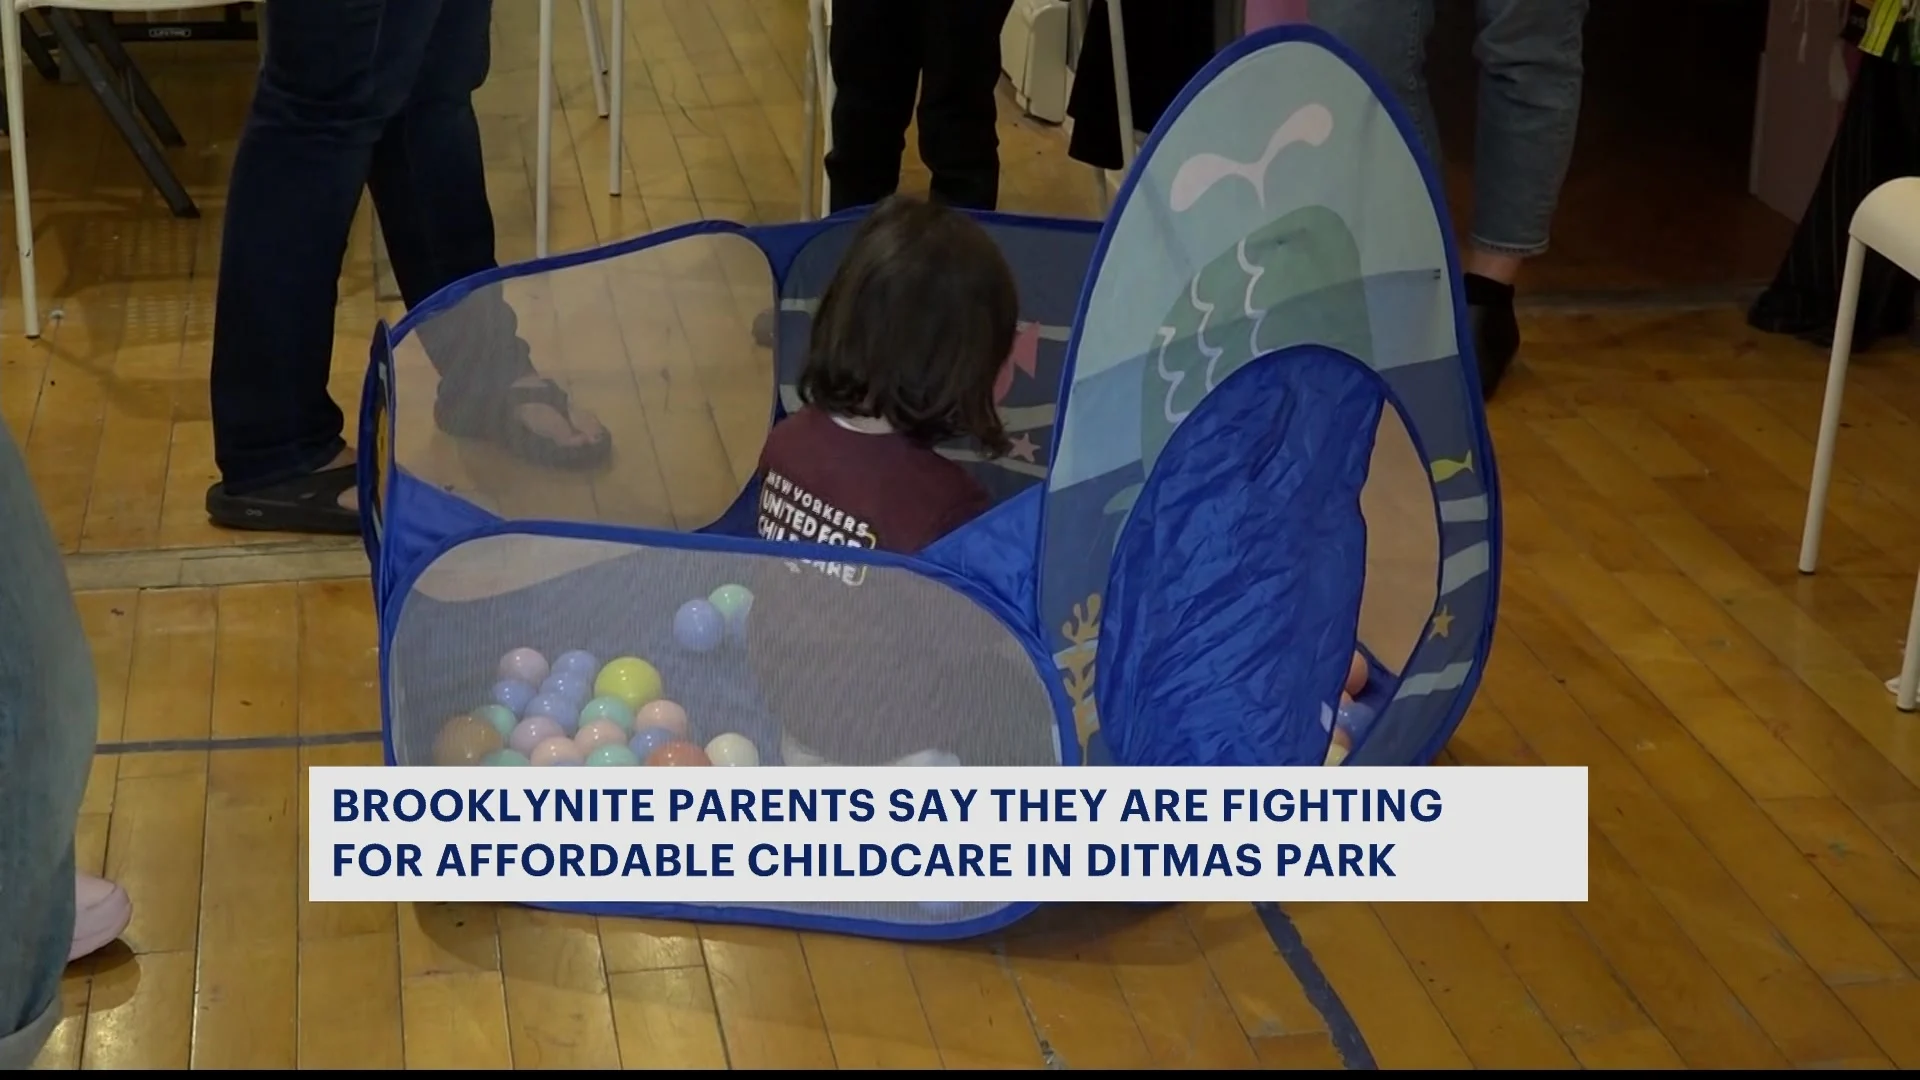 Ditmas Park and Kensington parents speak on child care concerns at pre-Mother’s Day event